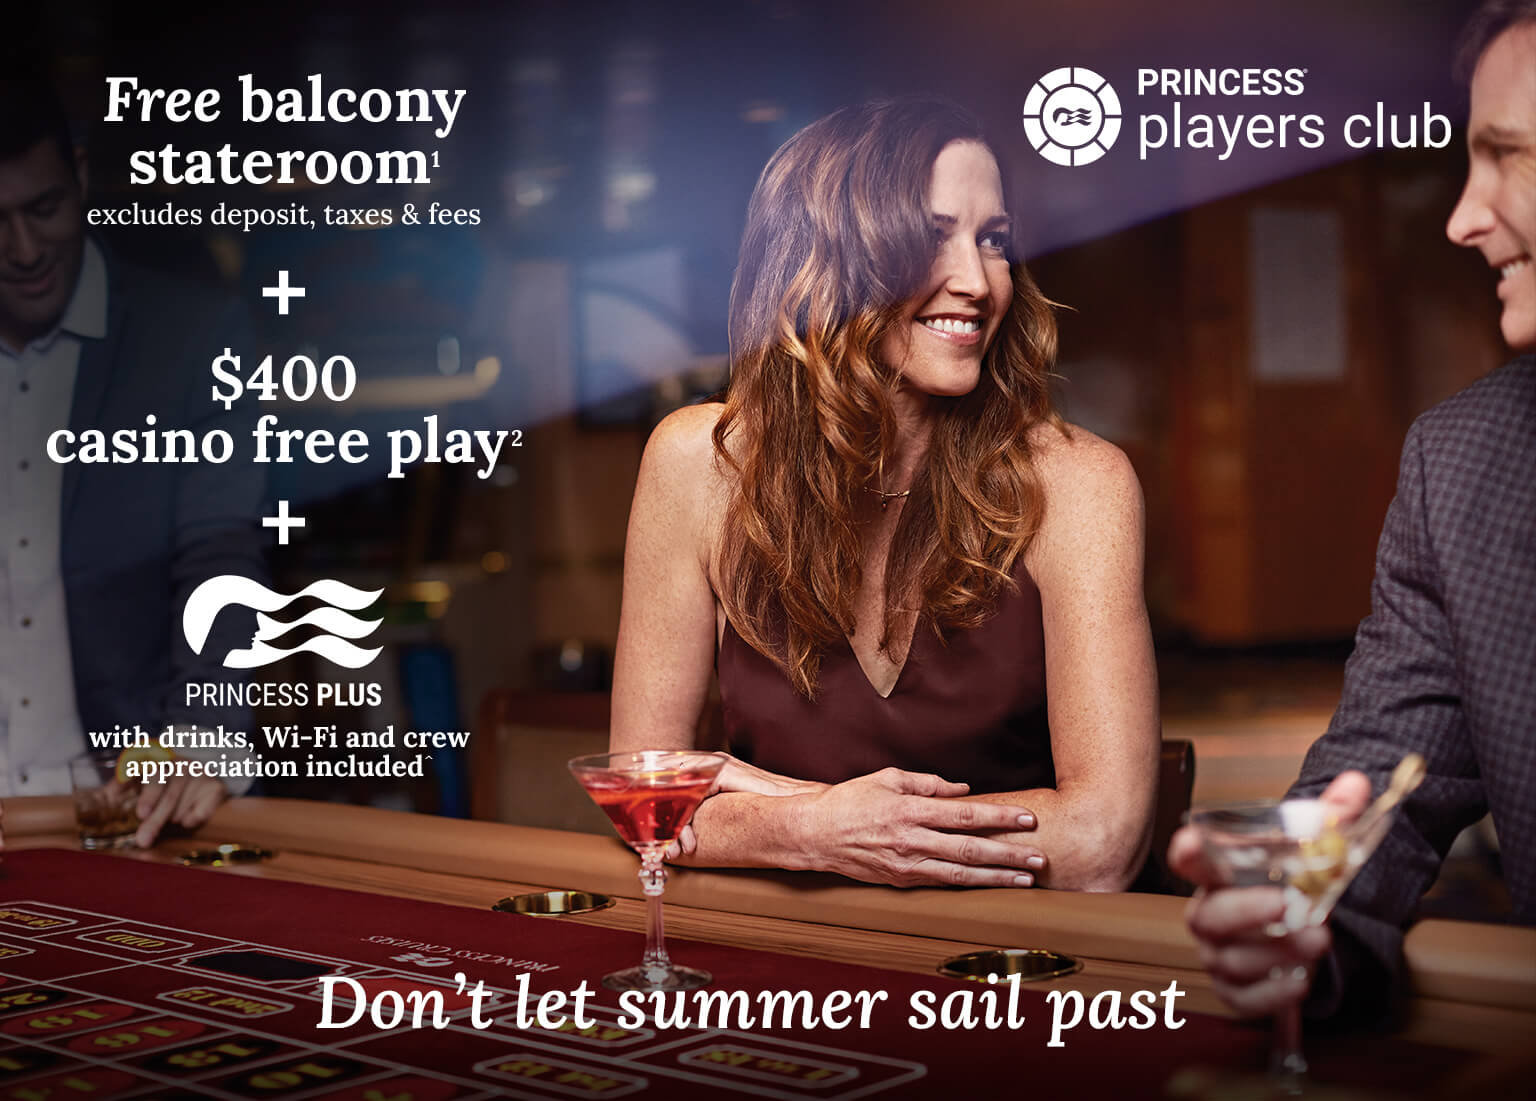 Free balcony stateroom + $400 casino free play + Princess Plus included. Click here to book.